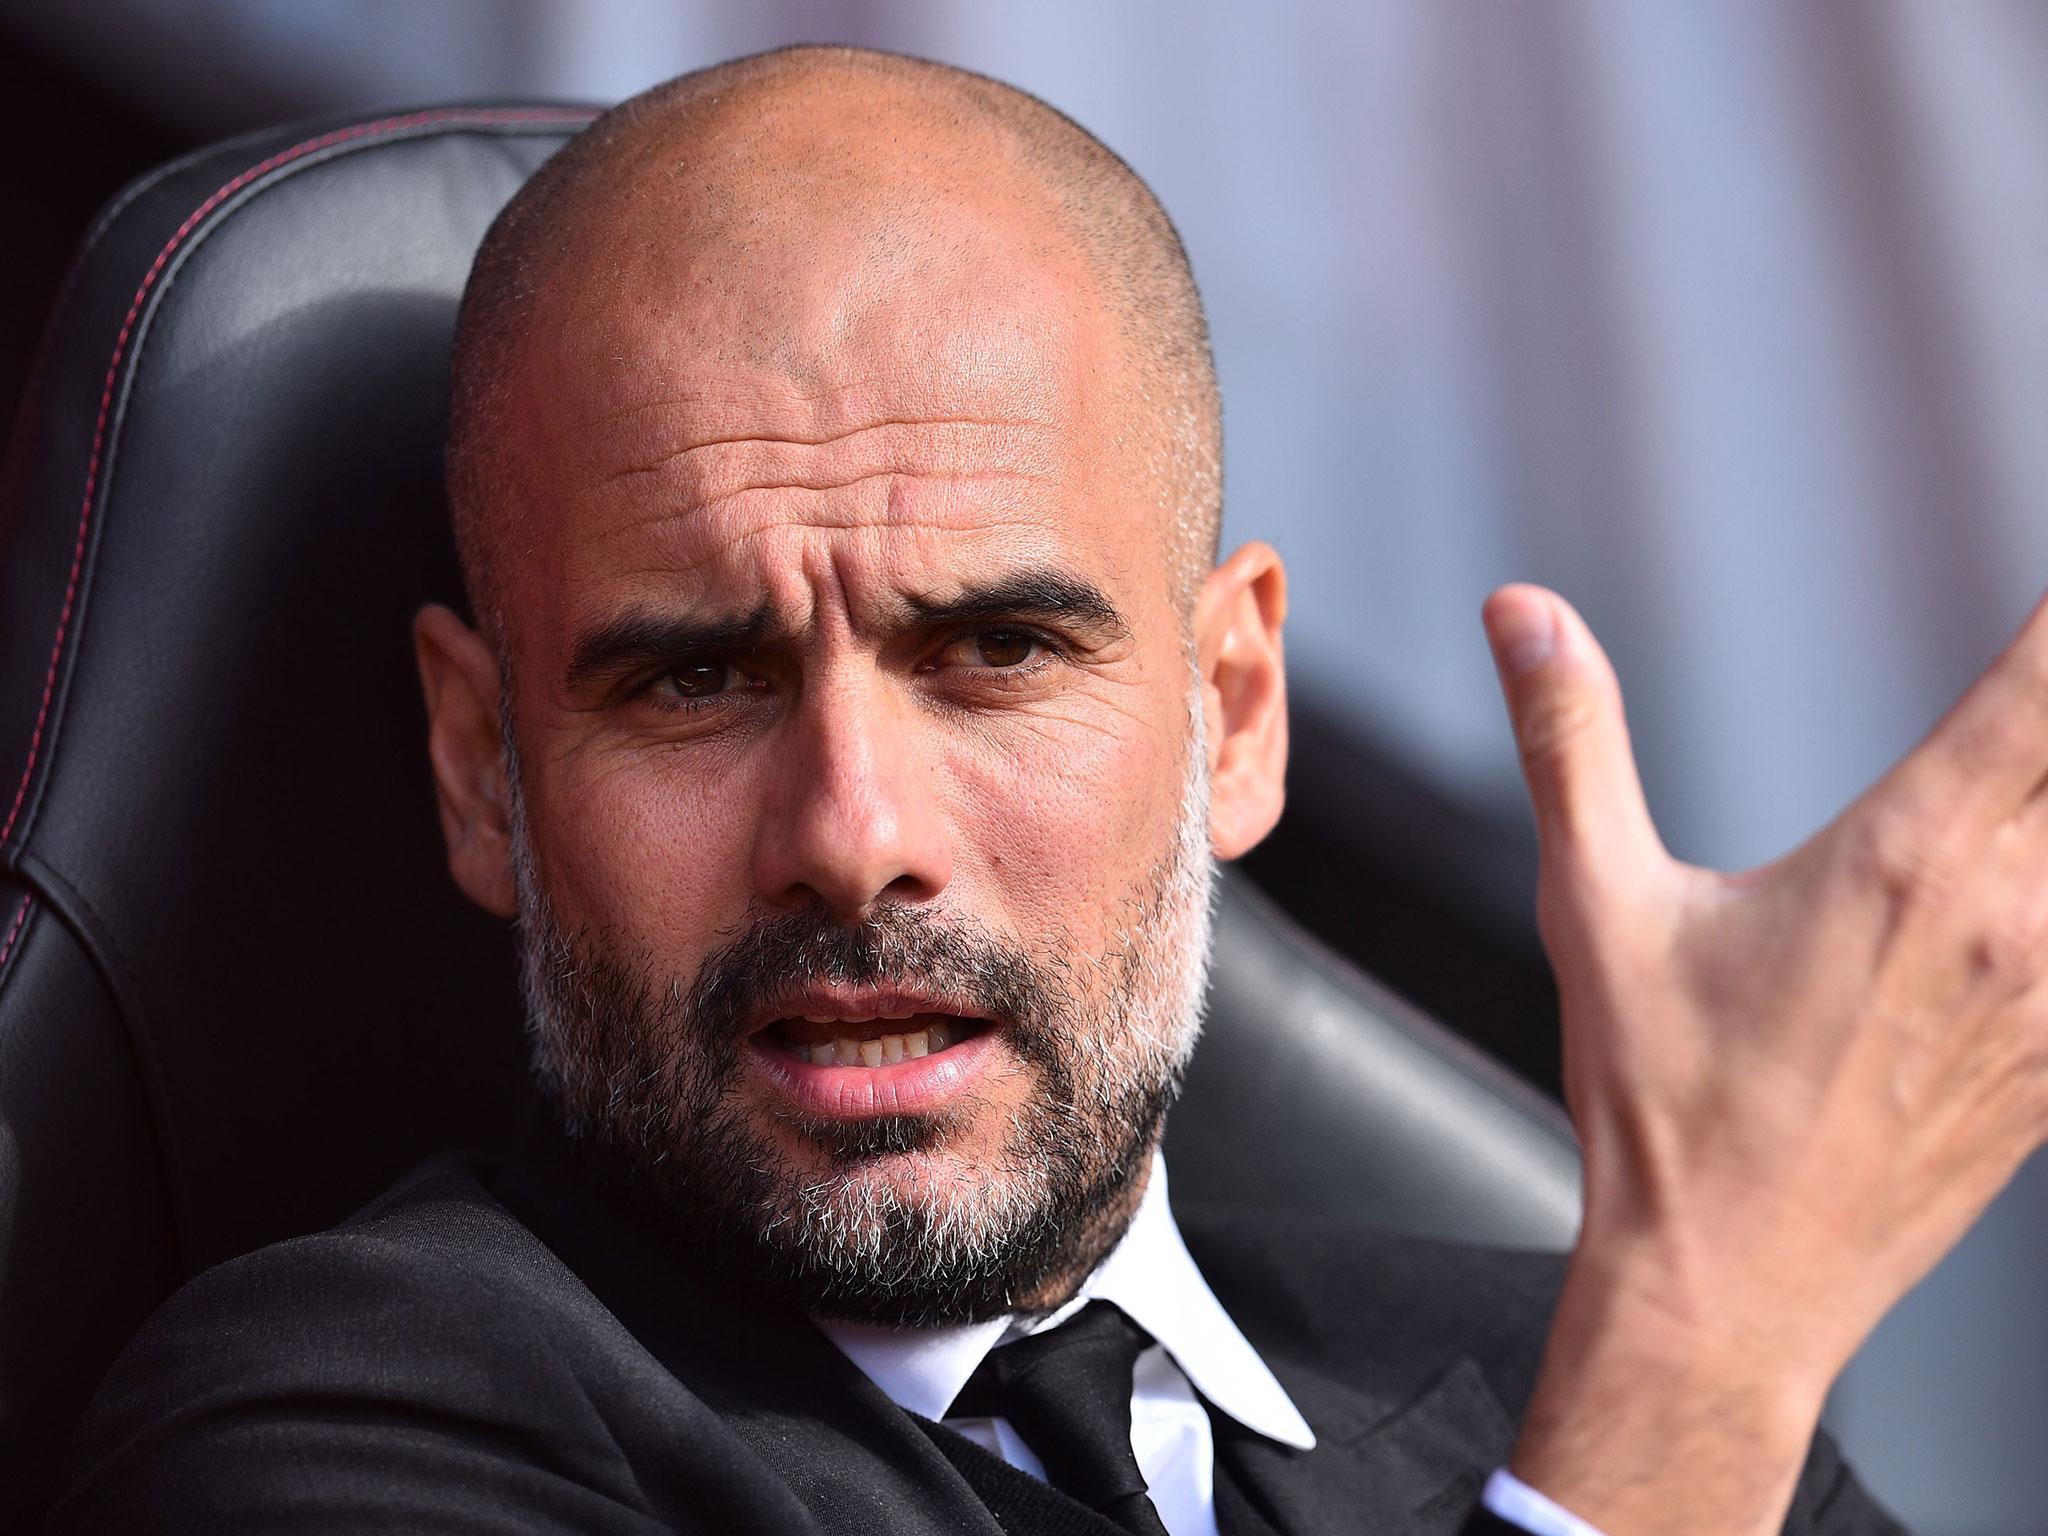 Guardiola was named the number 1 coach in the world